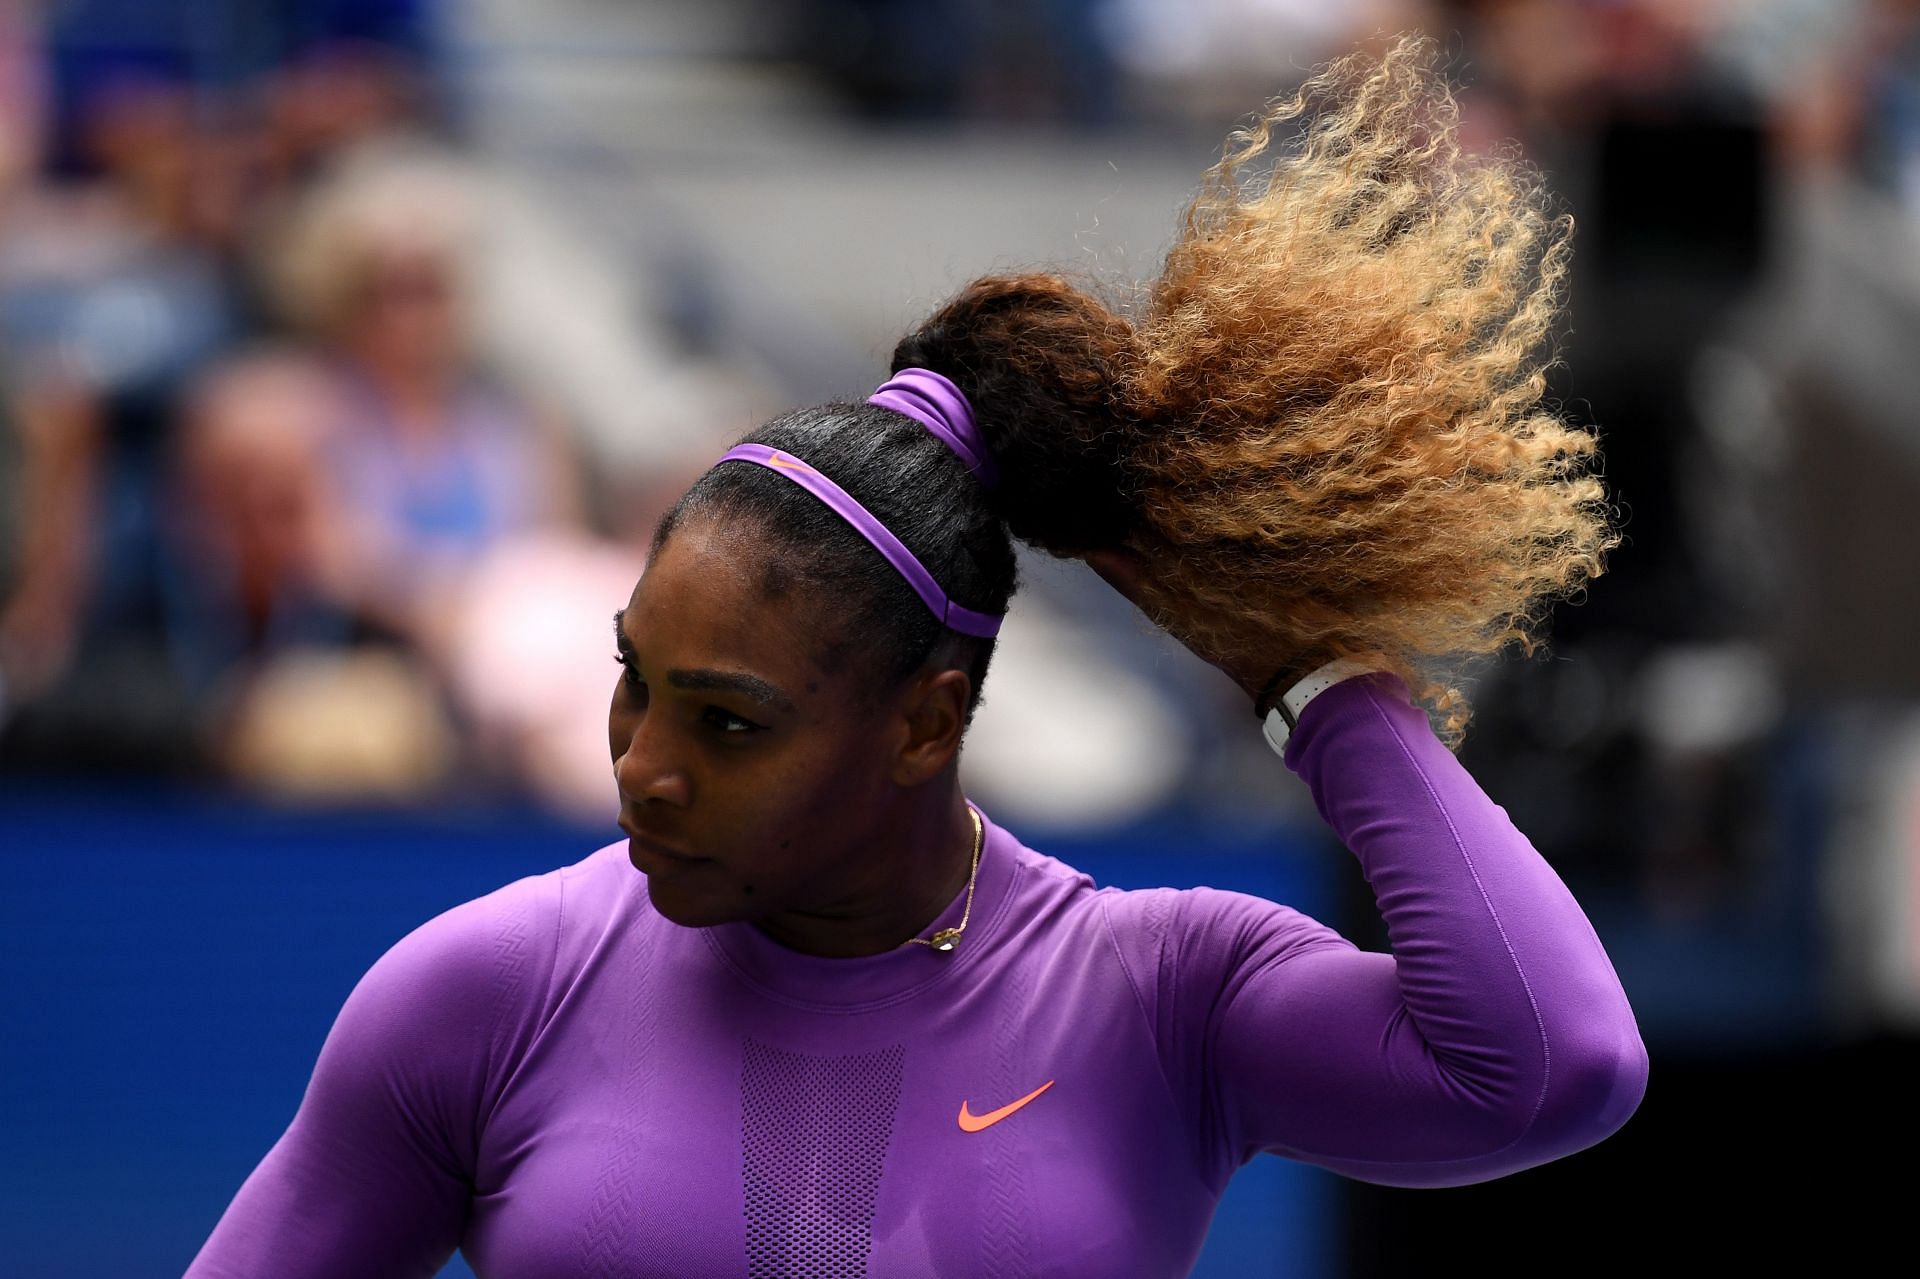 Serena Williams recently announced her decision to reitre from professioanl tennis after the 2022 US Open.